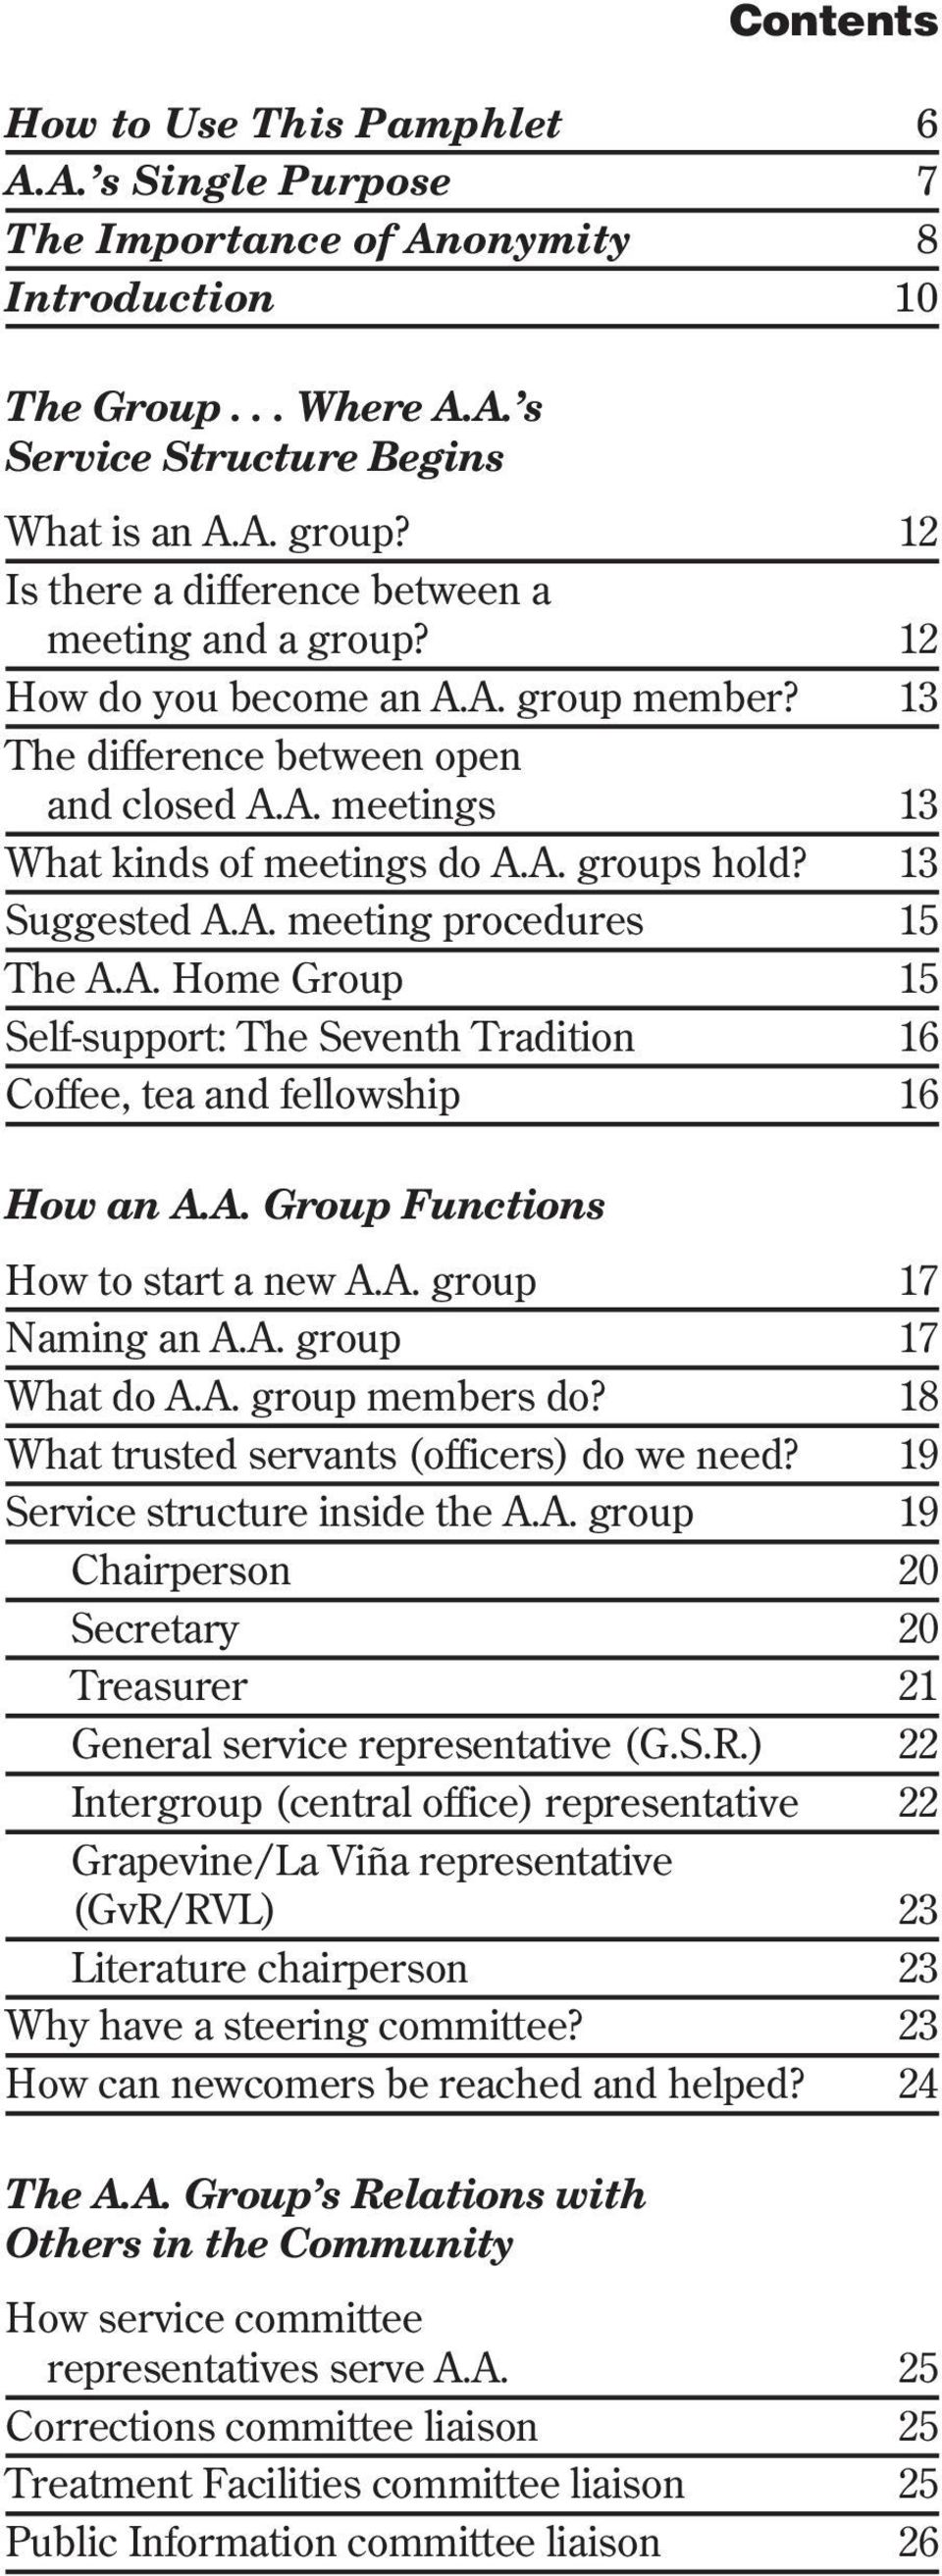 13 Suggested A.A. meeting procedures 15 The A.A. Home Group 15 Self-support: The Seventh Tradition 16 Coffee, tea and fellowship 16 How an A.A. Group Functions How to start a new A.A. group 17 Naming an A.